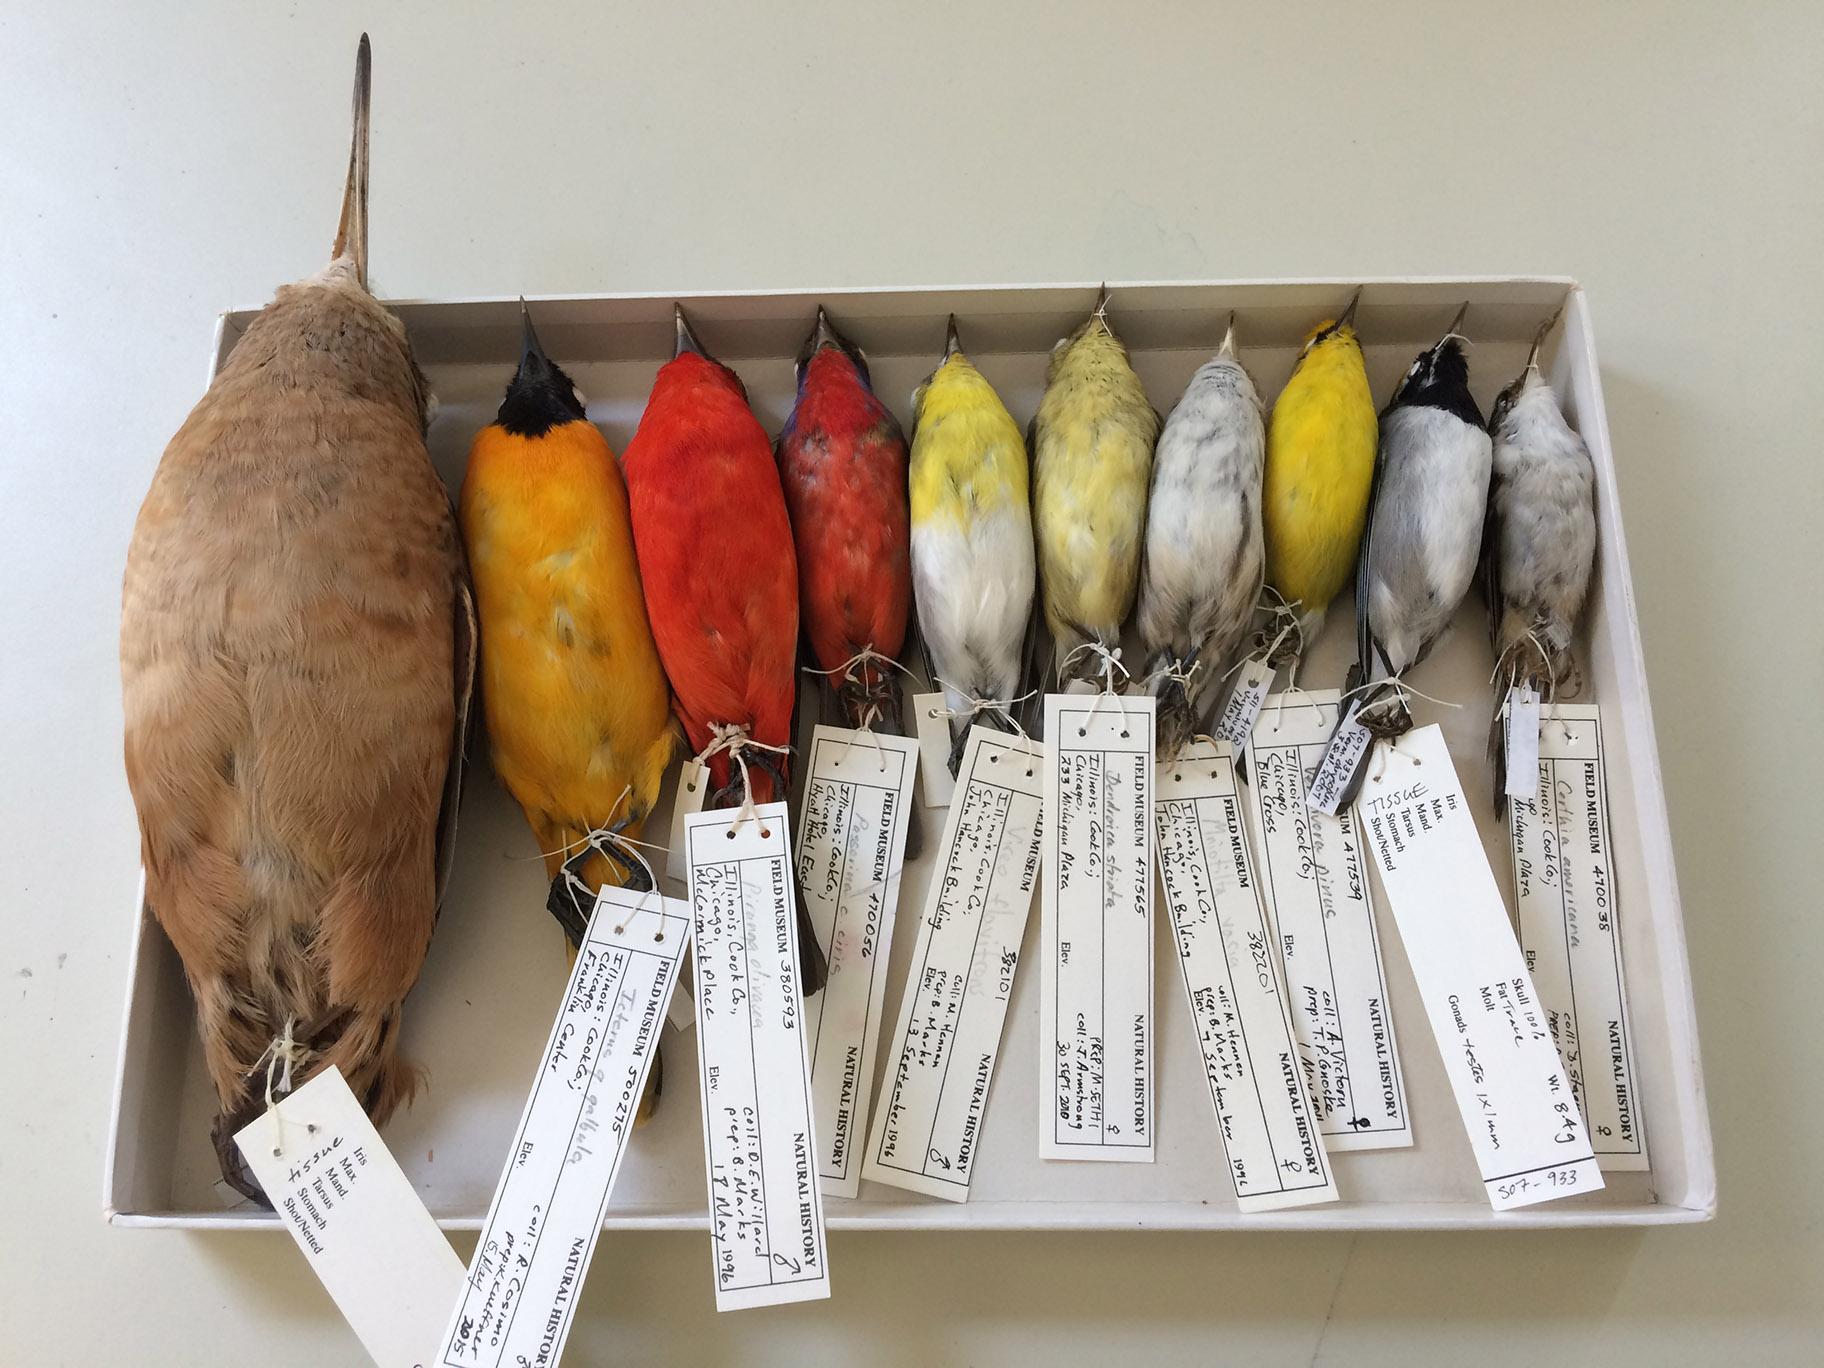 Dead birds collected by the Chicago Bird Collision Monitor were handed over to the Bird Department of the Field Museum. (Josh Engel / Field Museum)